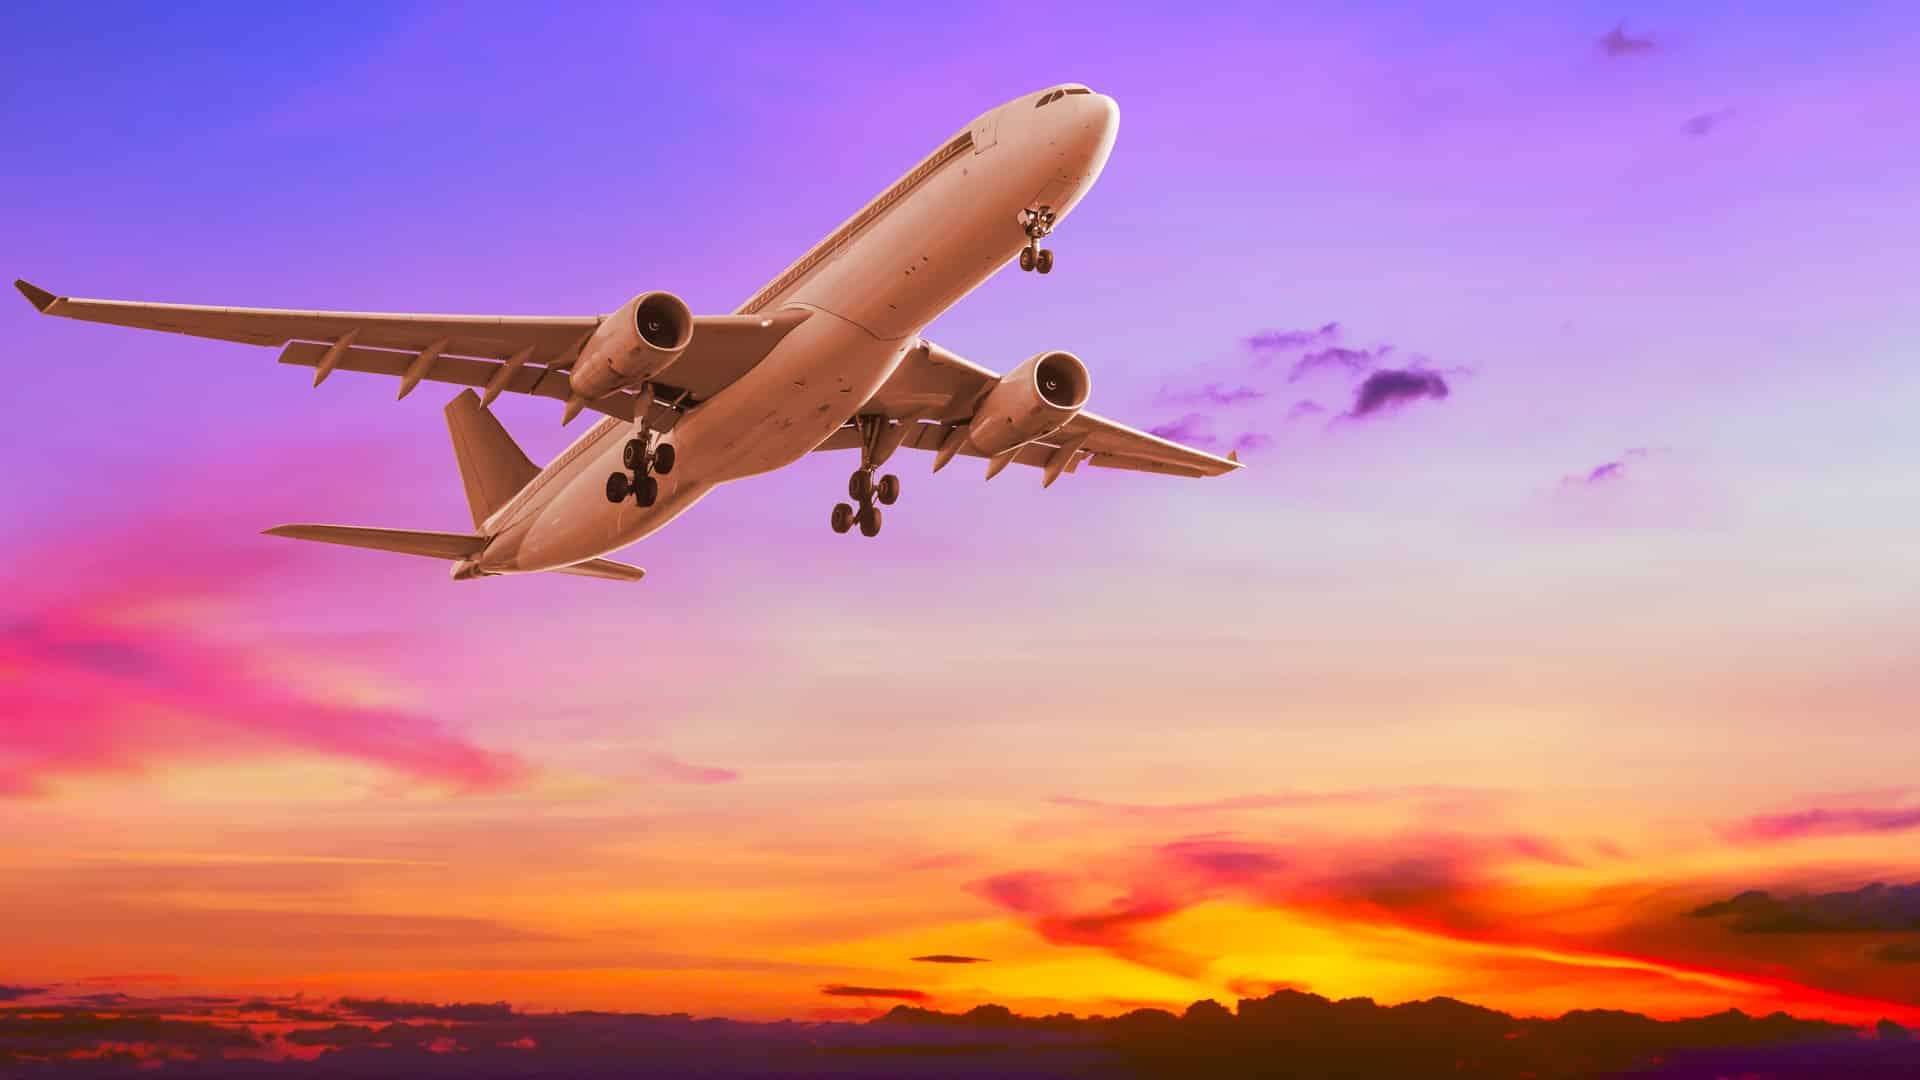 Why COVID-19 means the era of ever cheaper air travel could be over